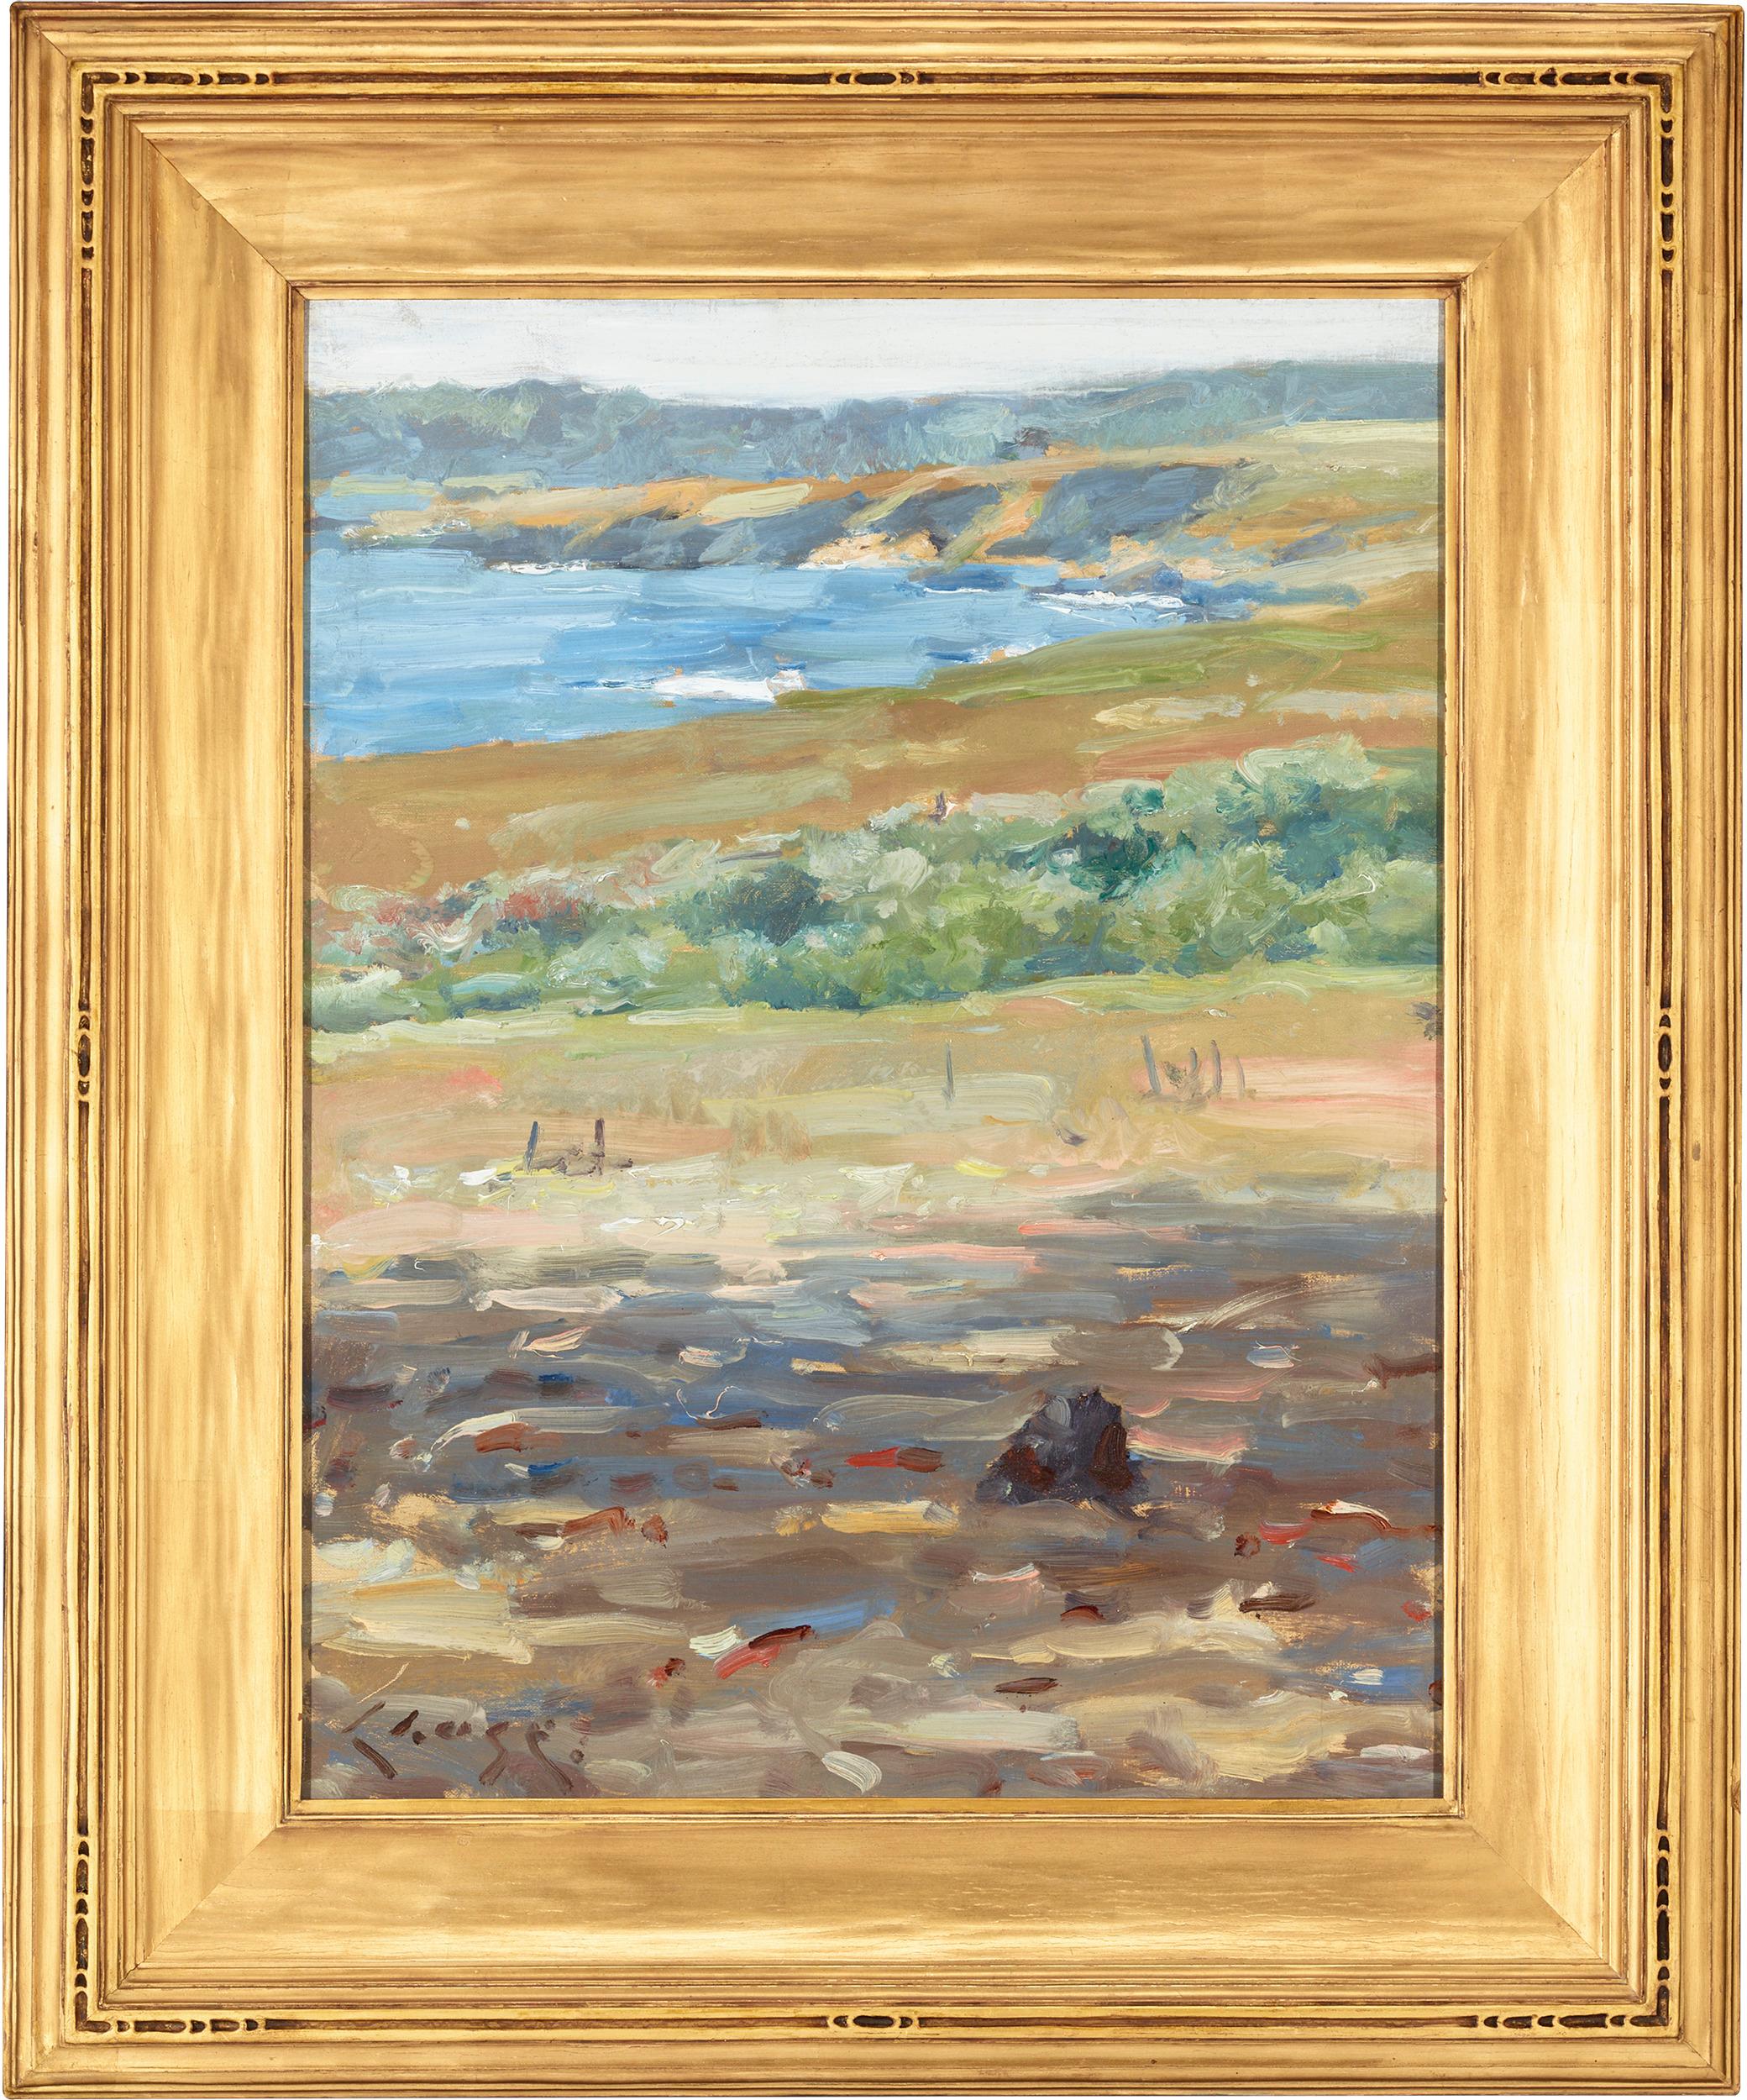 Coastal Landscape, California (Carmel-by-the-Sea) - Painting by William Merritt Chase